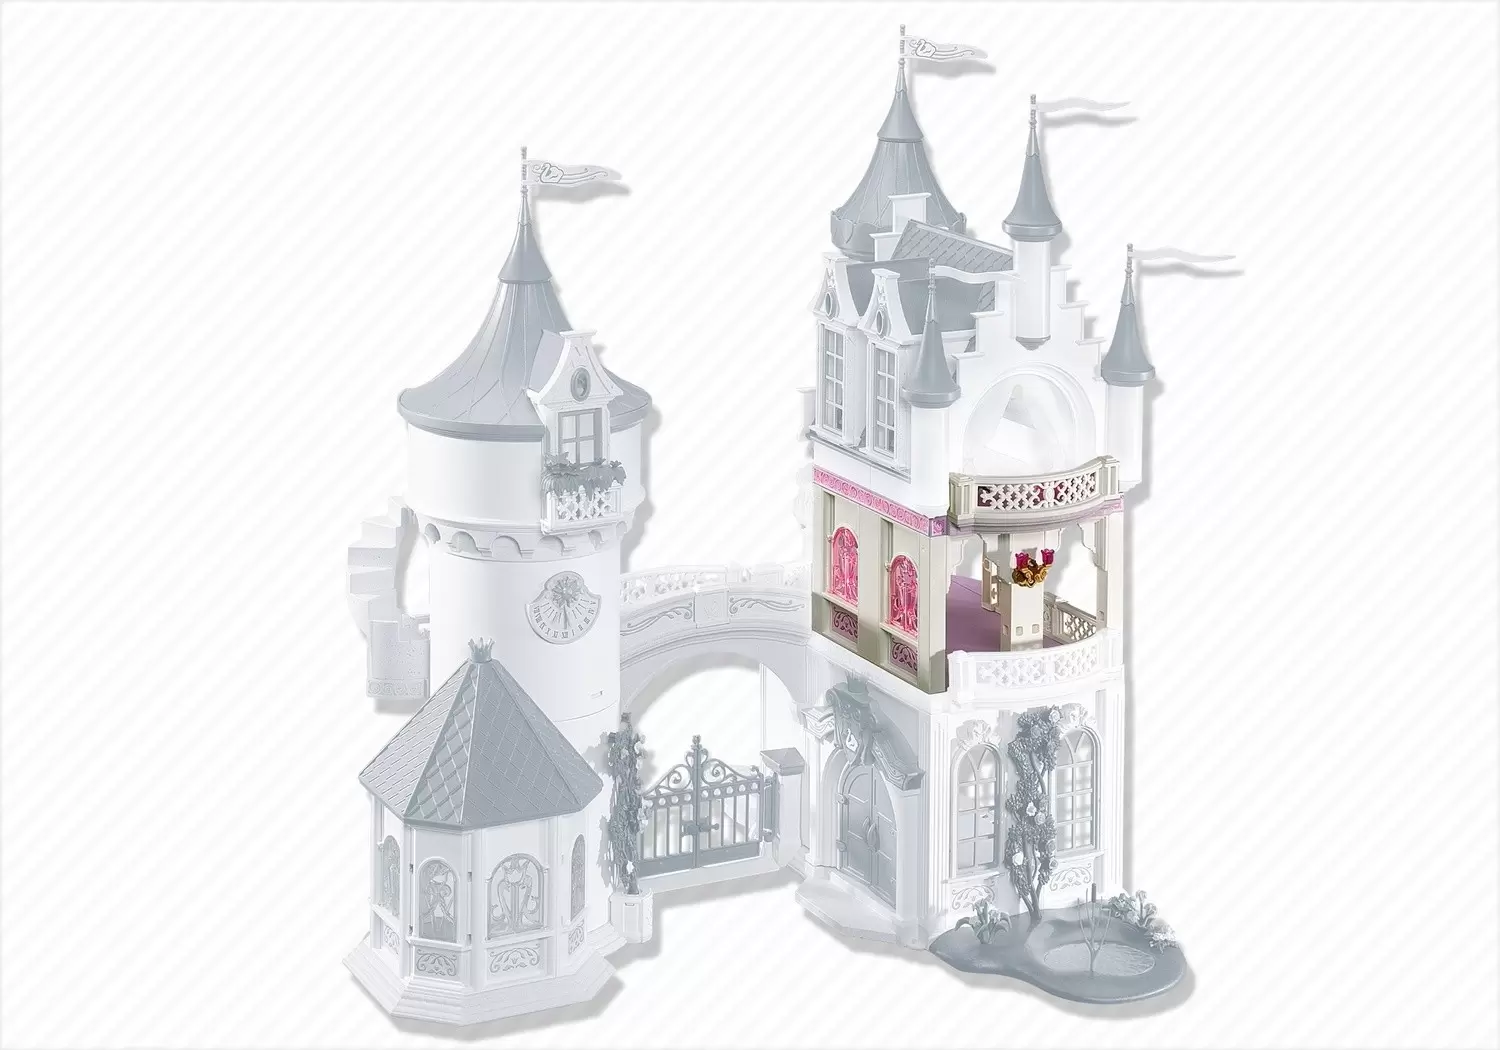 Playmobil Accessories & decorations - Extension for Princess Fantasy Castle (5142)